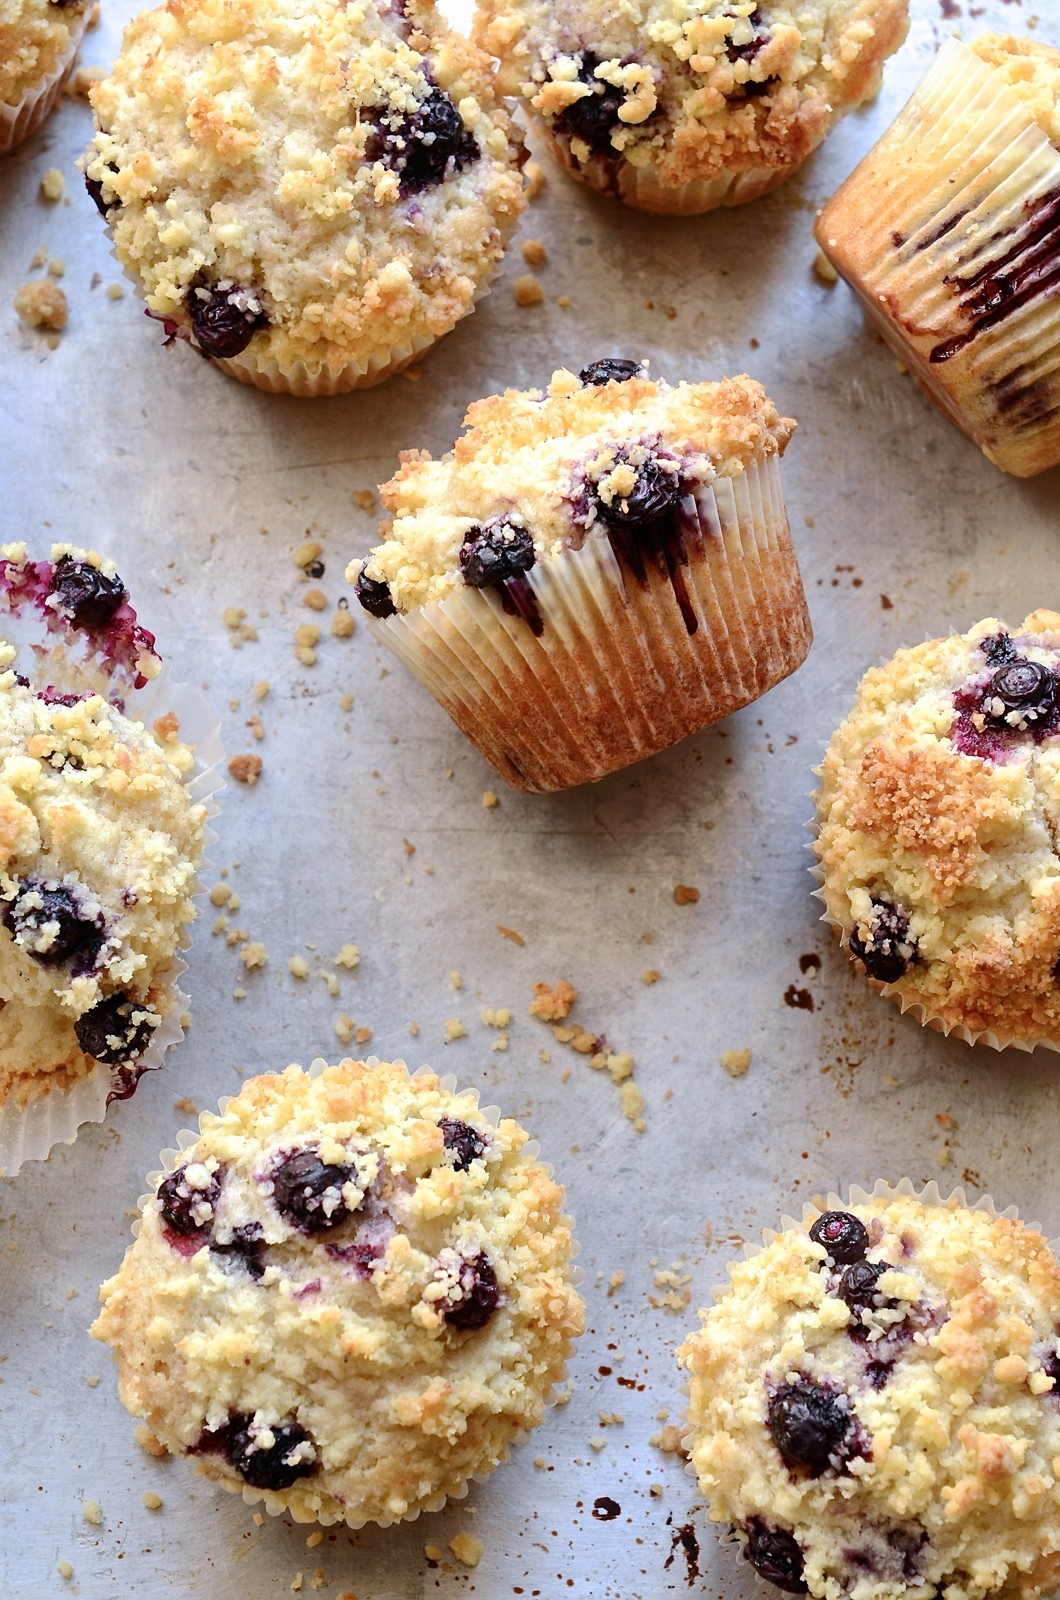 Blueberry coconut crumble muffins